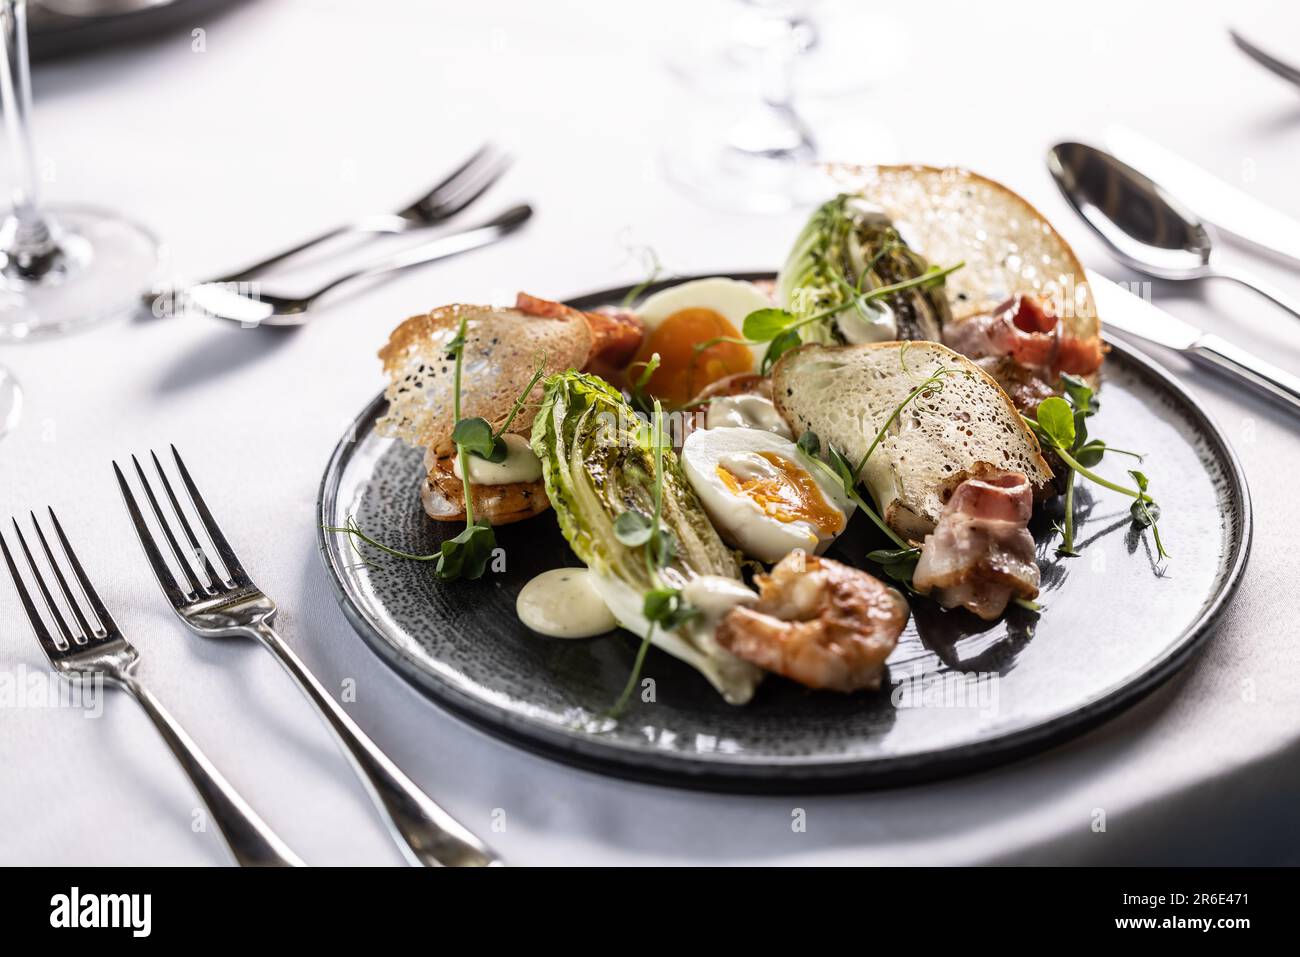 A twist of an elegant ceasar salad with shrimps served on a dark plate in a restaurant. Stock Photo